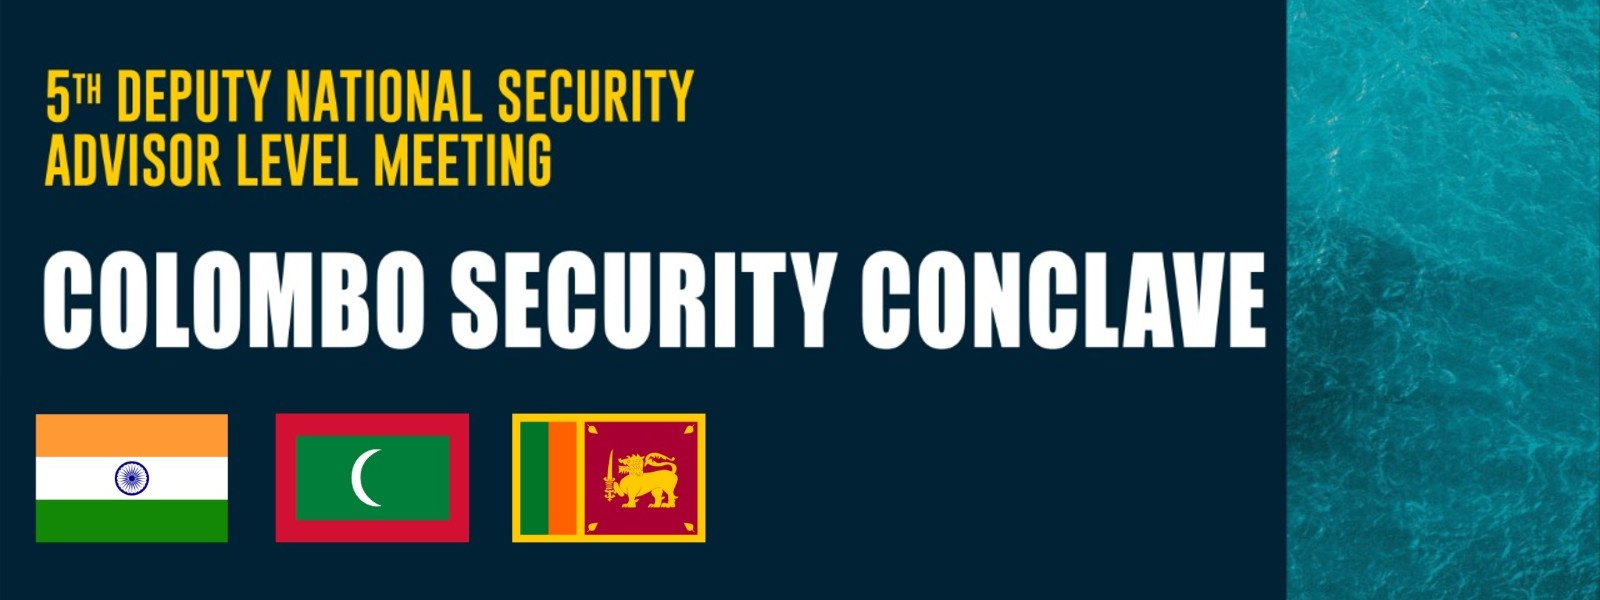 Colombo Security Conclave begins on Wednesday (04)